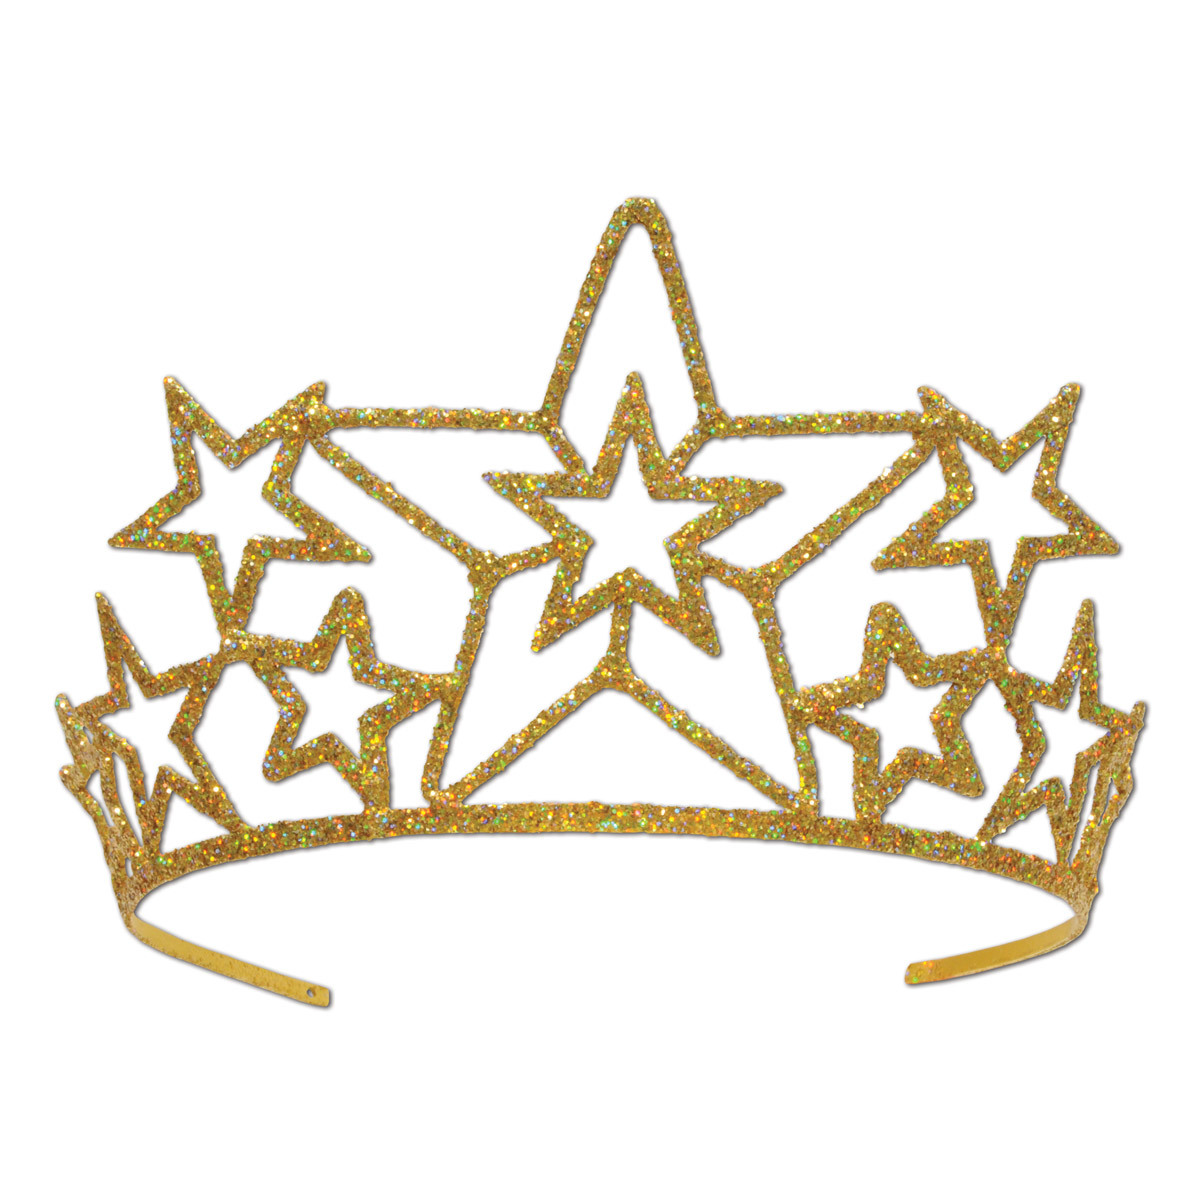 Gold plastic glittered tiara with various sized stars deplayed.